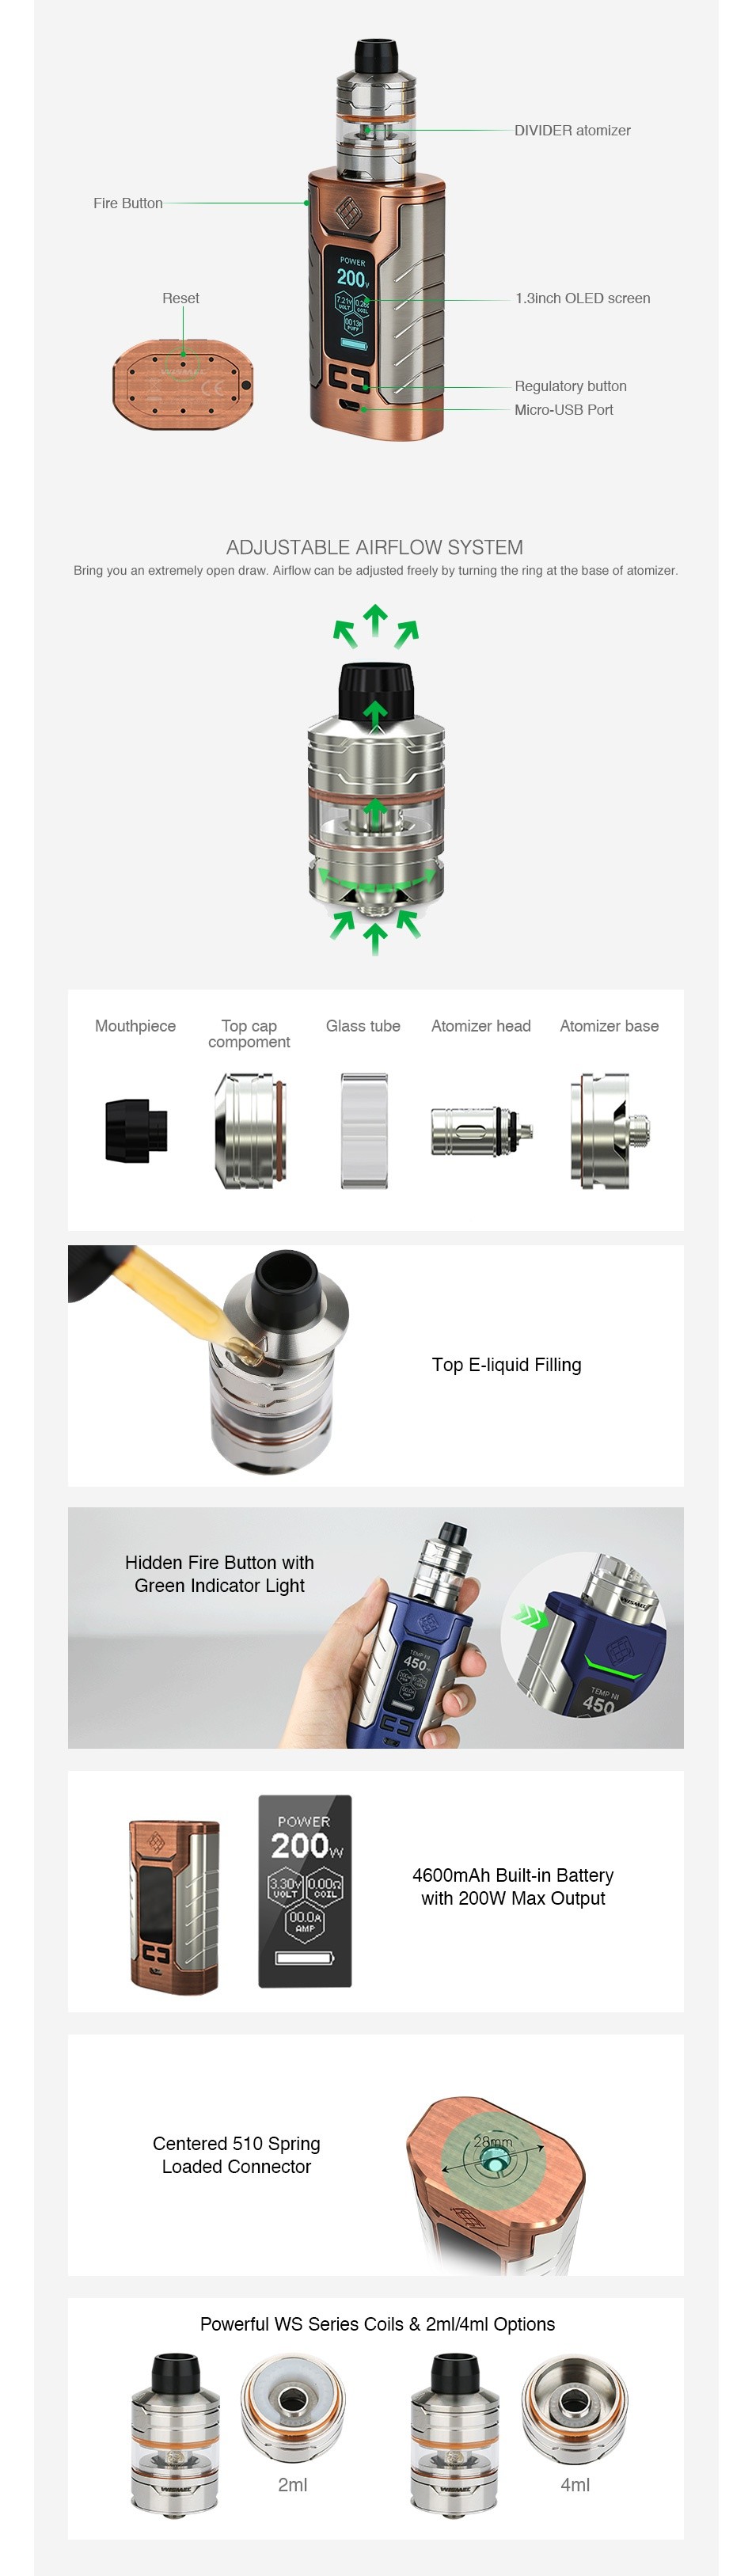 WISMEC SINUOUS FJ200 with Divider TC Kit 4600mAh 1 3Inch OLED scrccn E ADJUSTABLE AIRFLOW SYSTEM Bring ww an extremely Dnen draw  Airtknw can be aa ju sted reely ny tiring the ring at the hERe of AtomIzer    lass tube Atomizer head Atomizer bas Hidden Fire Button with Green Indicator Light 200 4600mAh Built in Battery Centered 510 Spring Loaded connector Powerful WS Series Coils 2ml 4ml Options   4ml